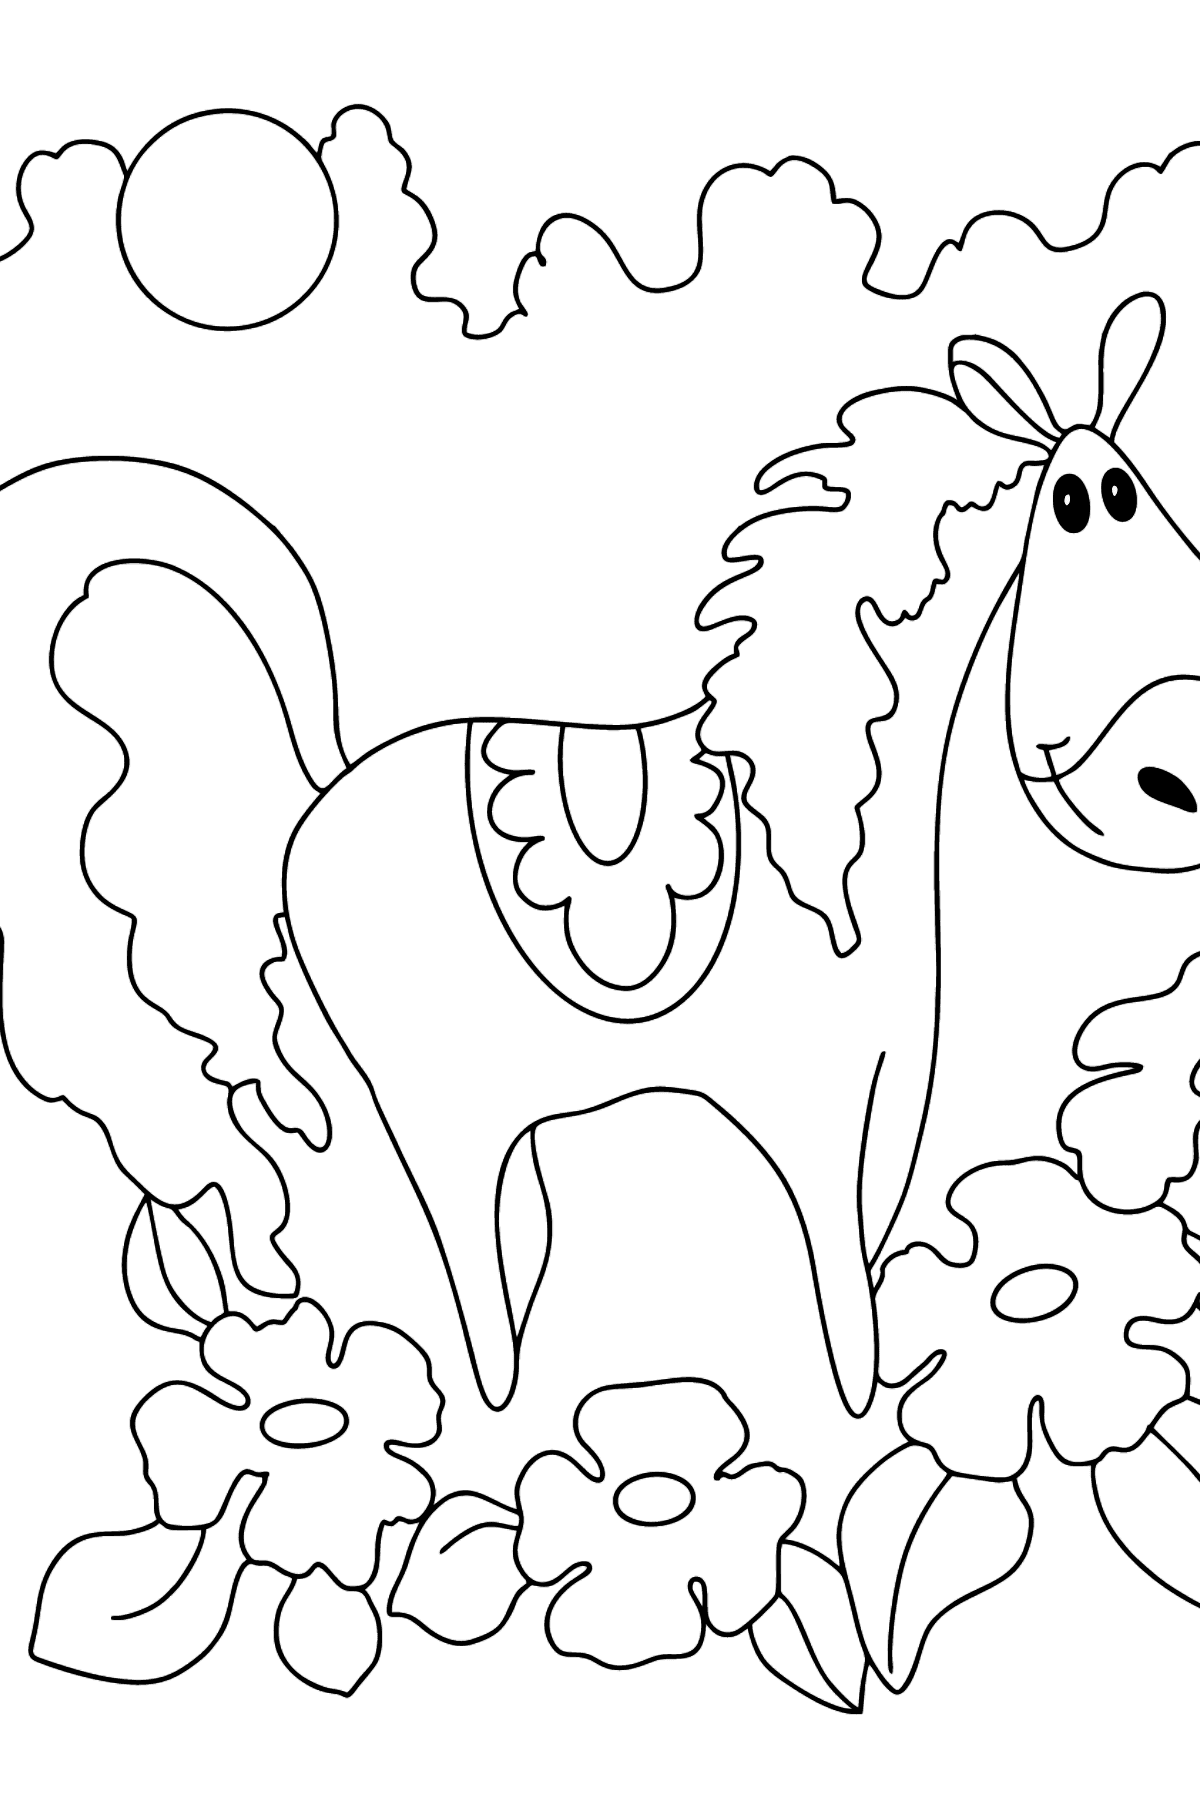 Complex coloring page a horse in flowers - Coloring Pages for Kids